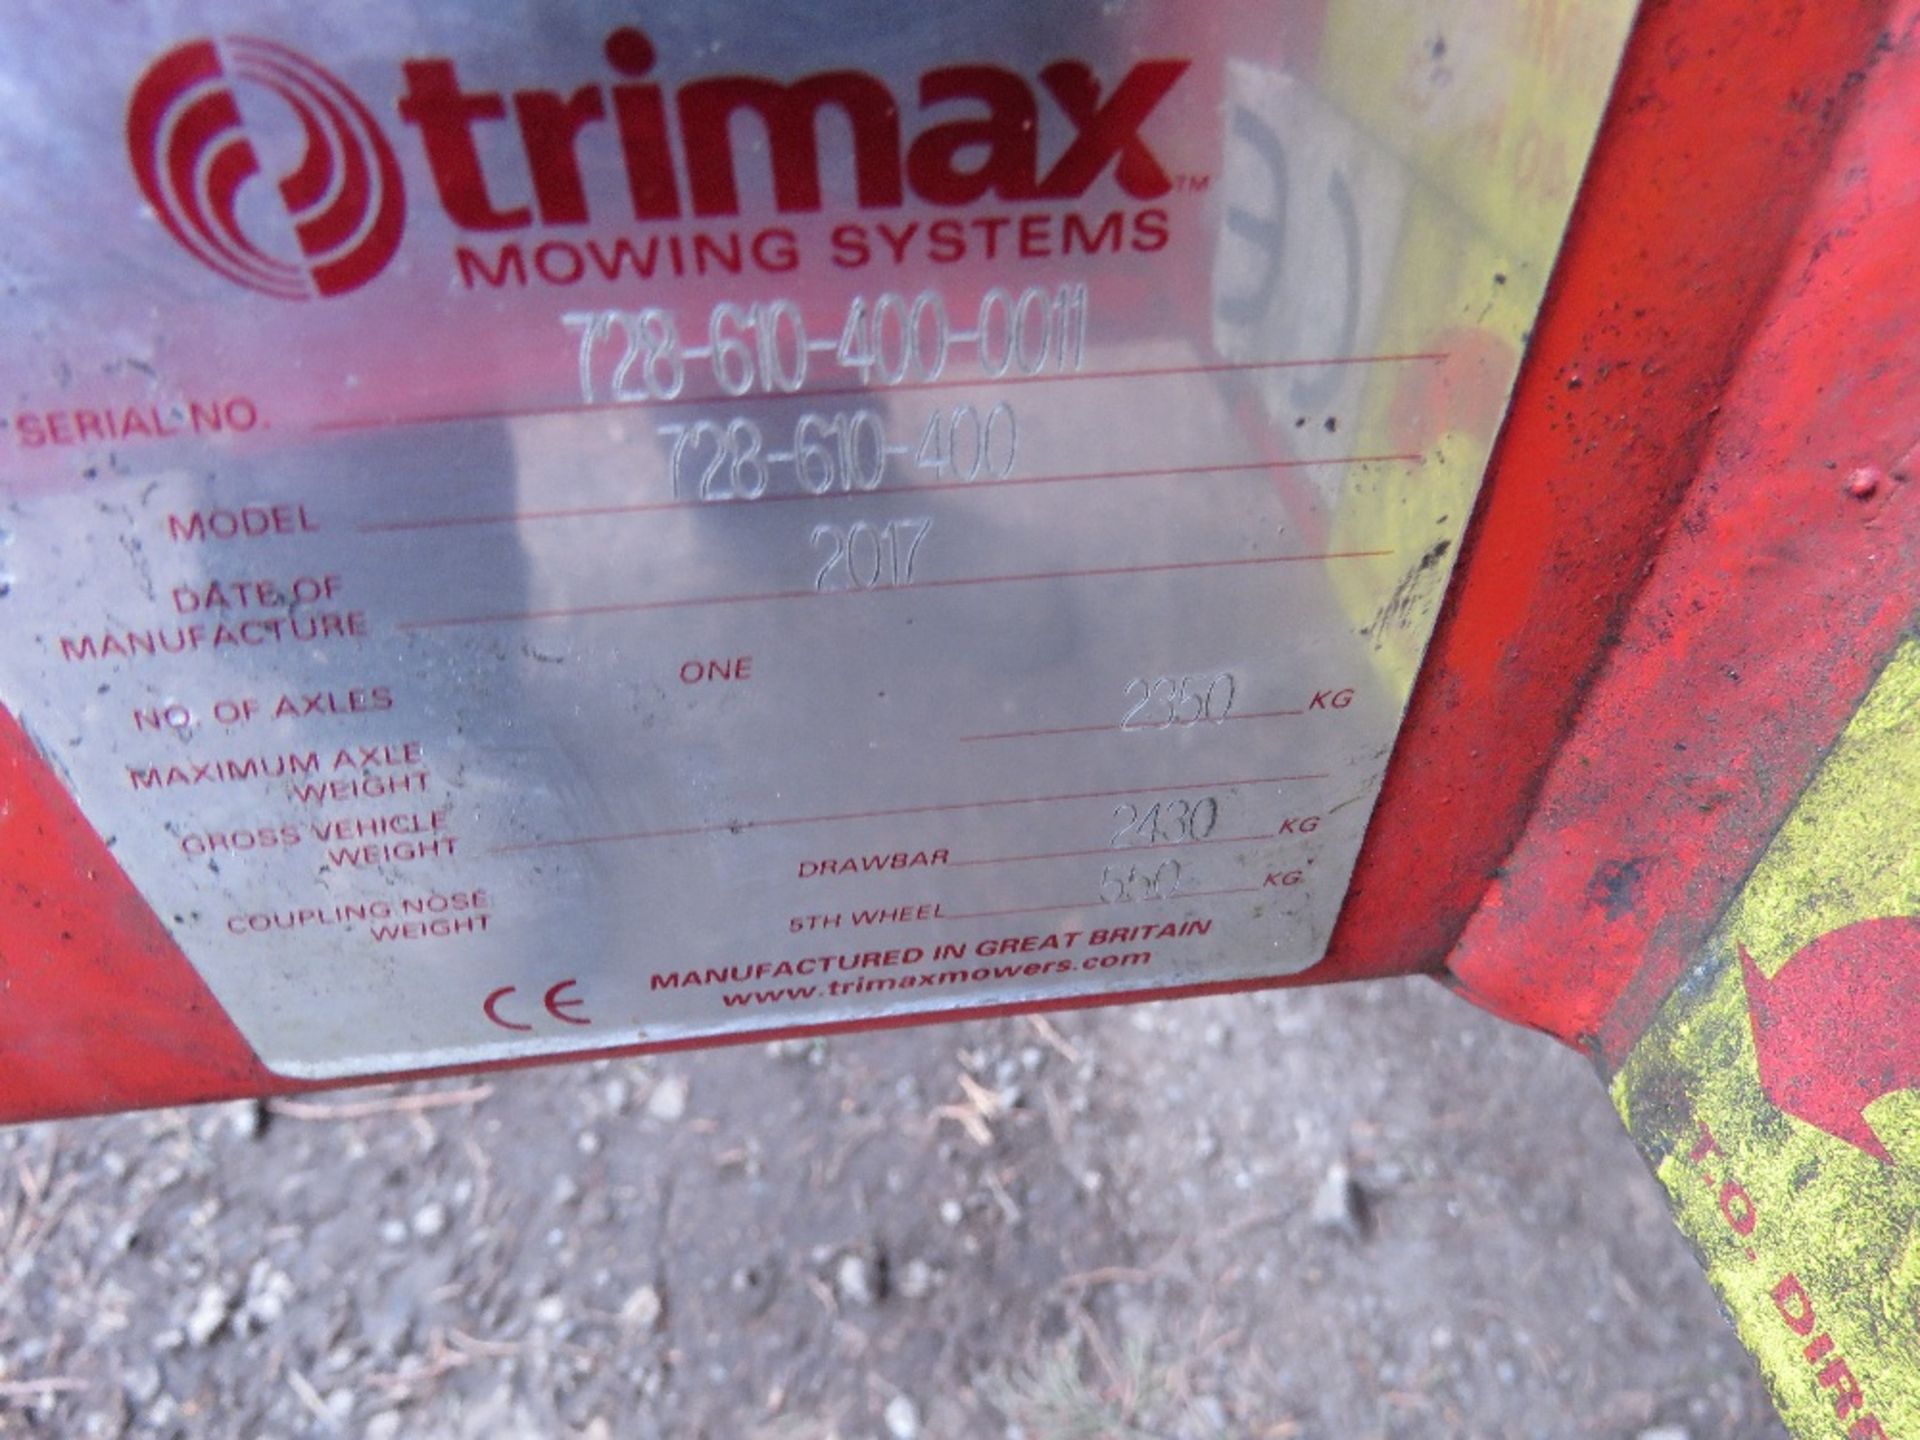 TRIMAX 728-610-400 BATWING TYPE ROLLER MOWER, YEAR 2017. PEGASUS S3 HEADS. NB: REQUIRES REPAIR TO CH - Image 10 of 14